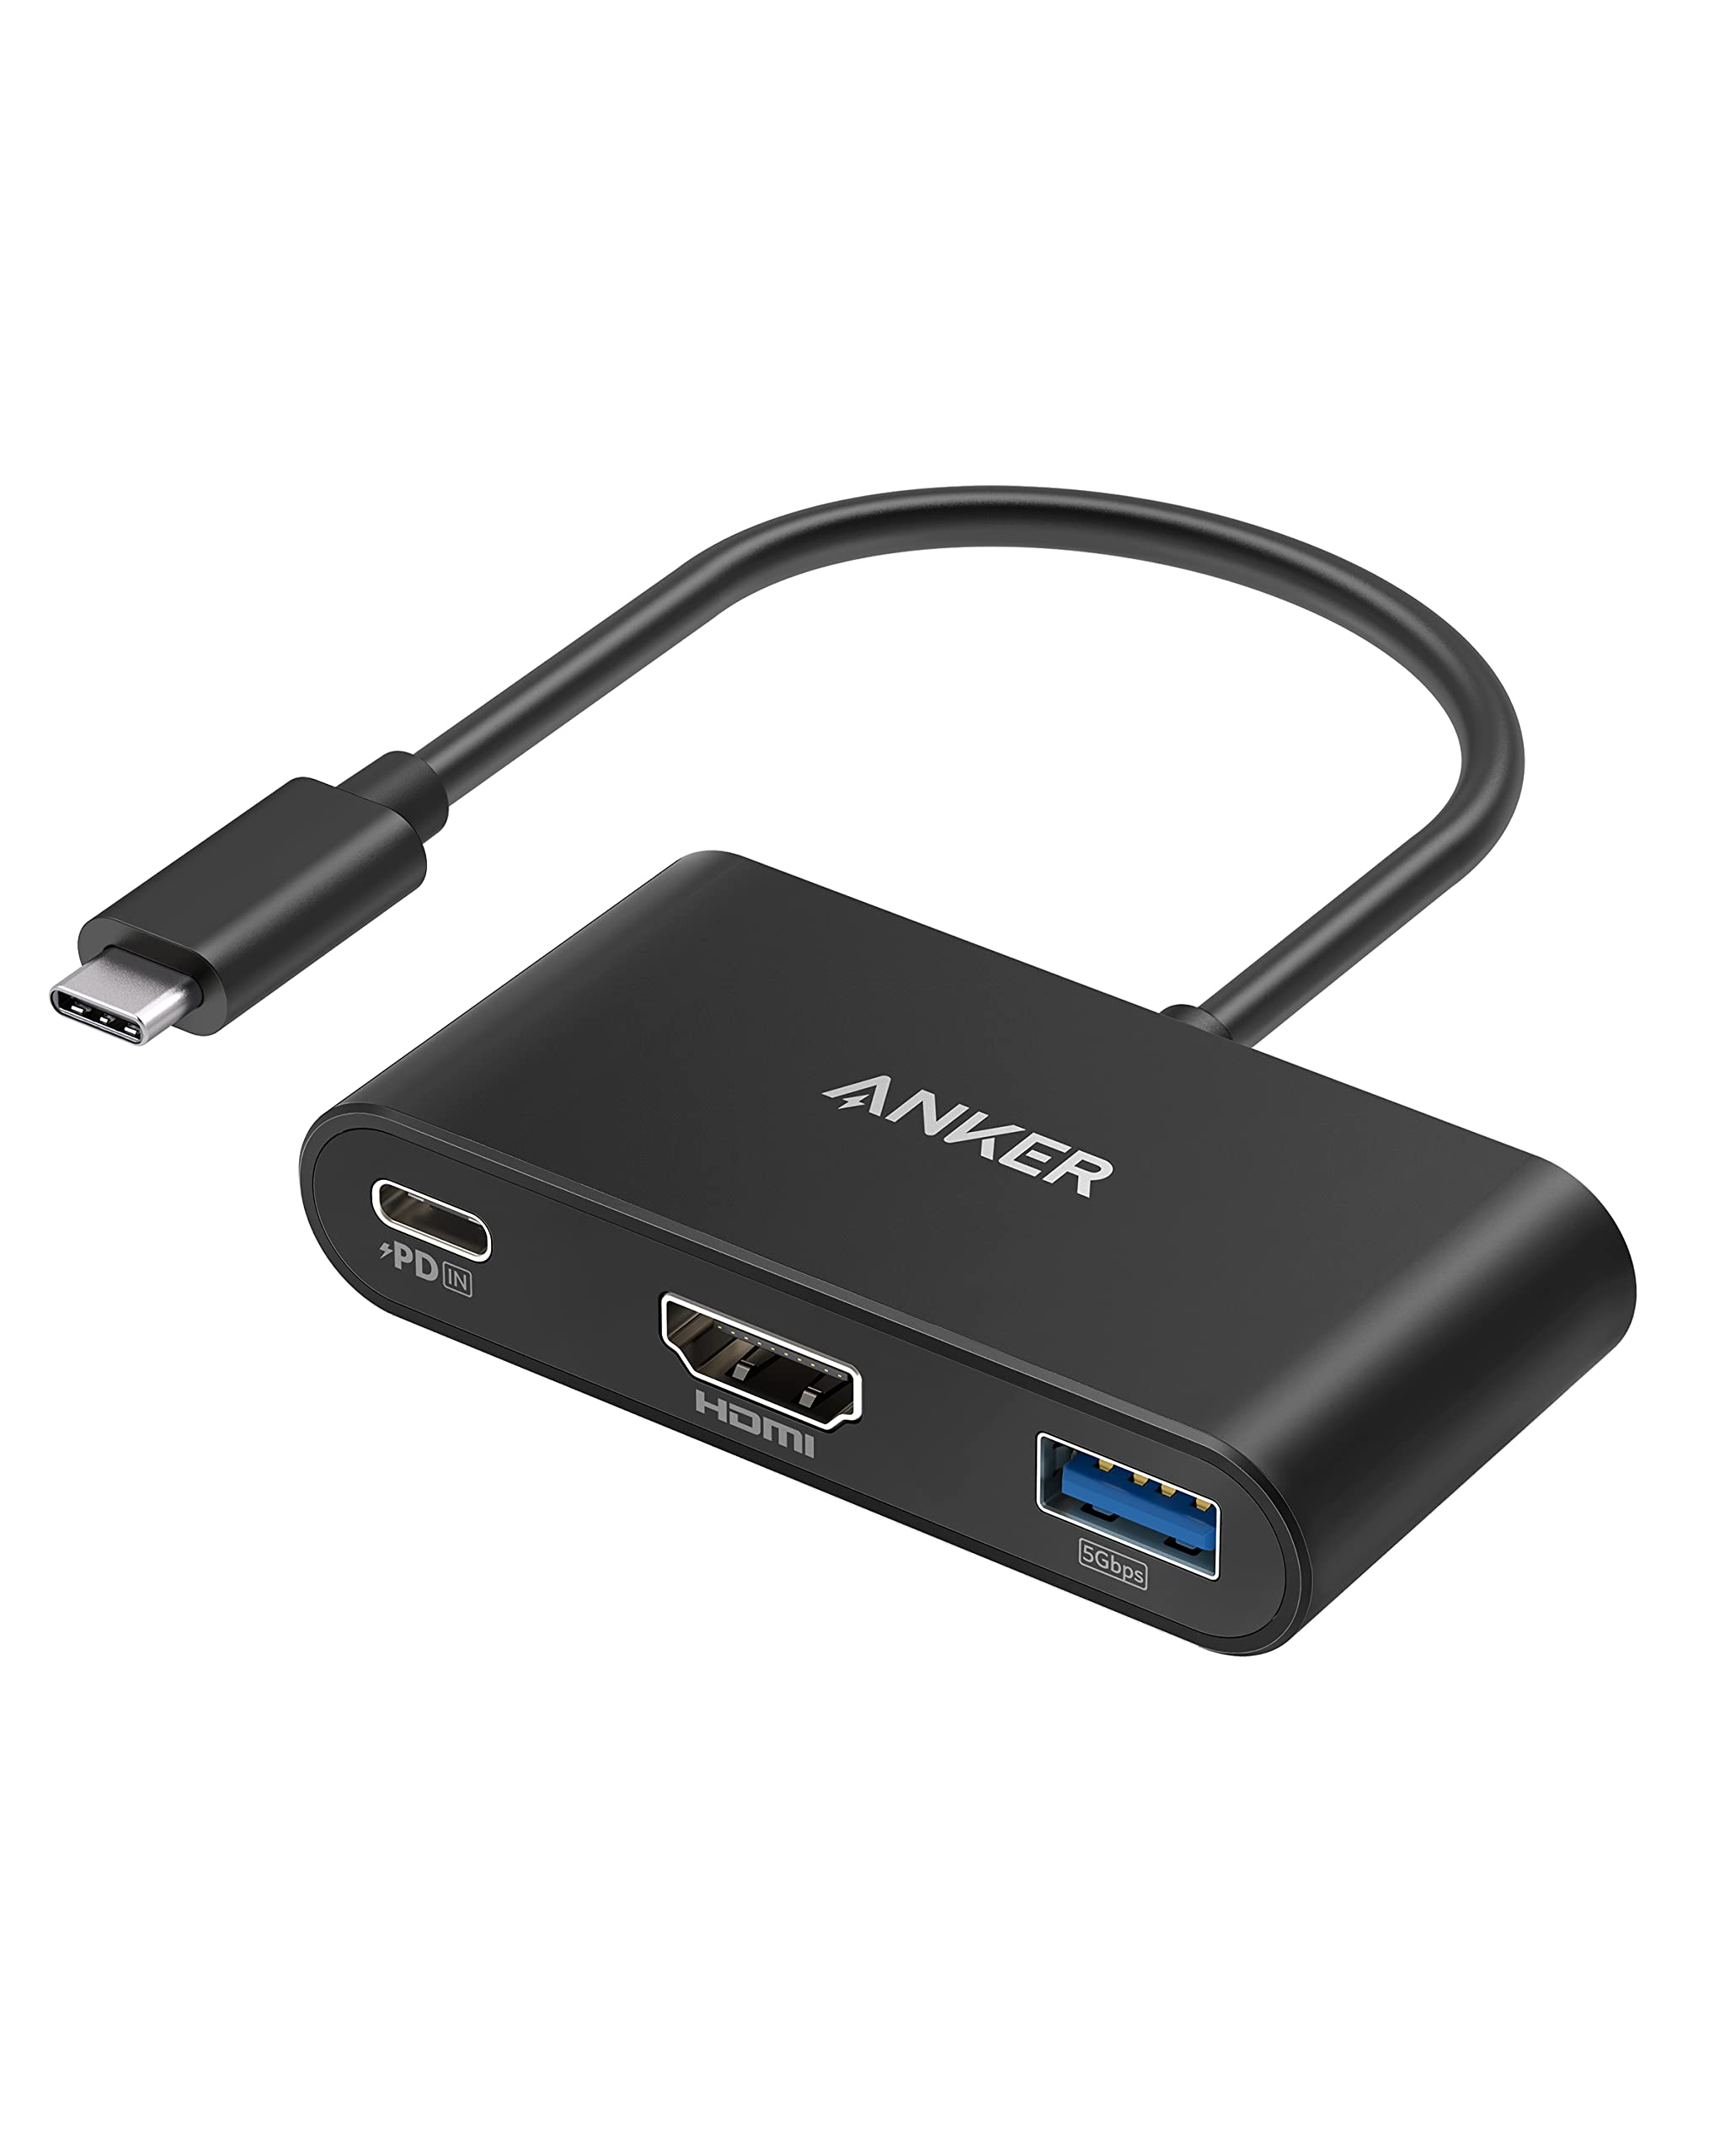 Anker PowerExpand+ USB-C to HDMI Adapter